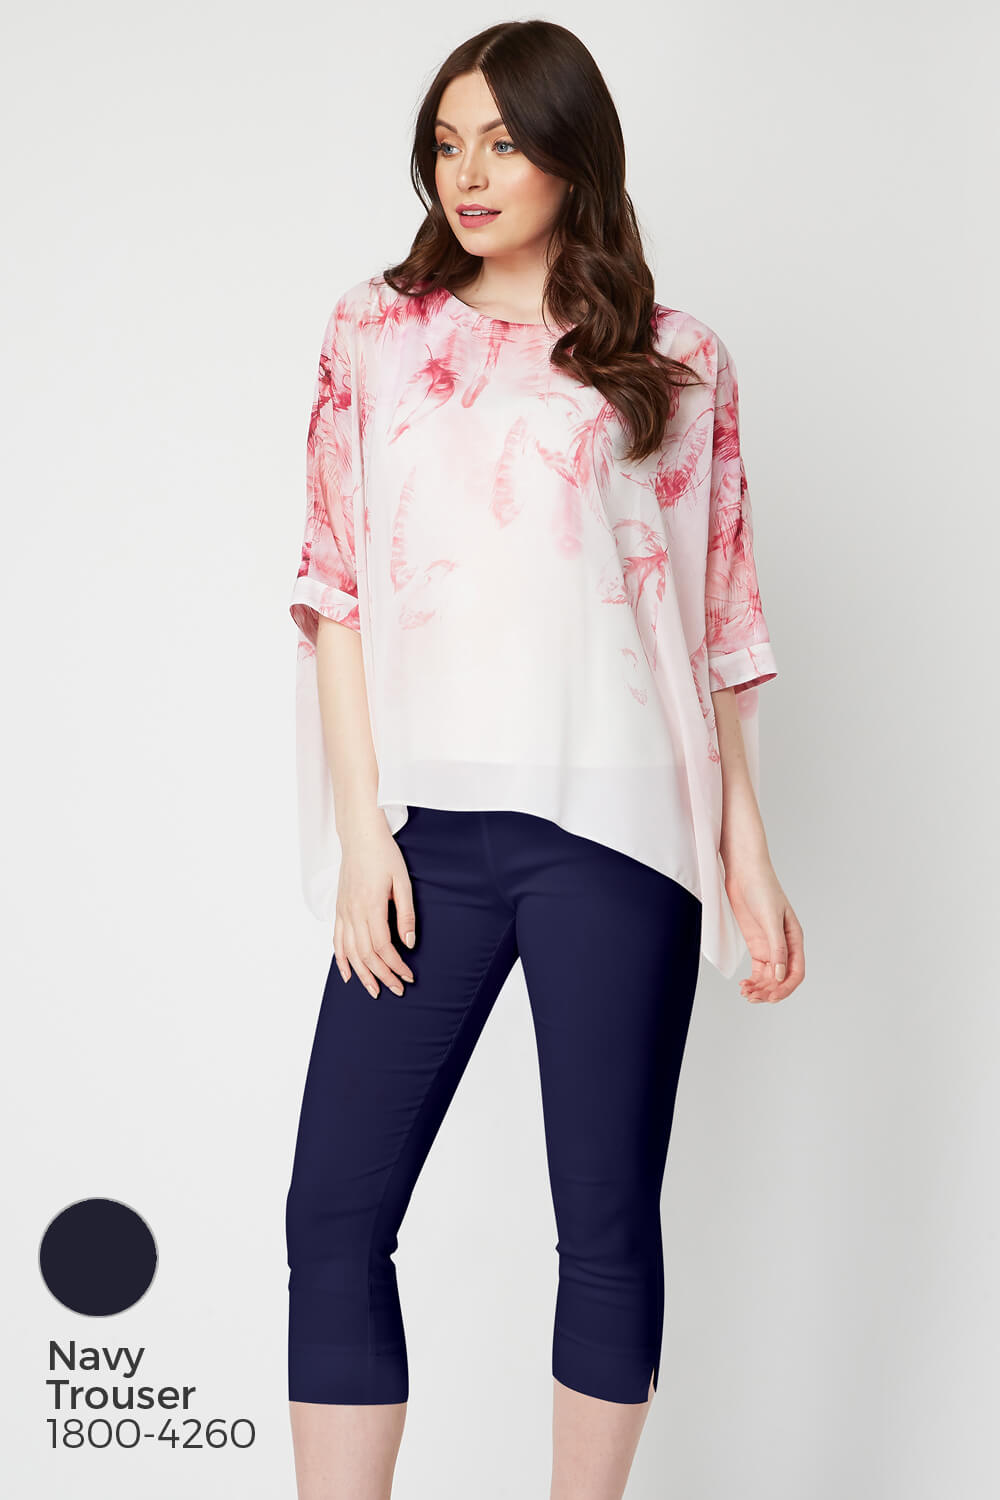 PINK Feather Border Print Overlay Top, Image 8 of 8